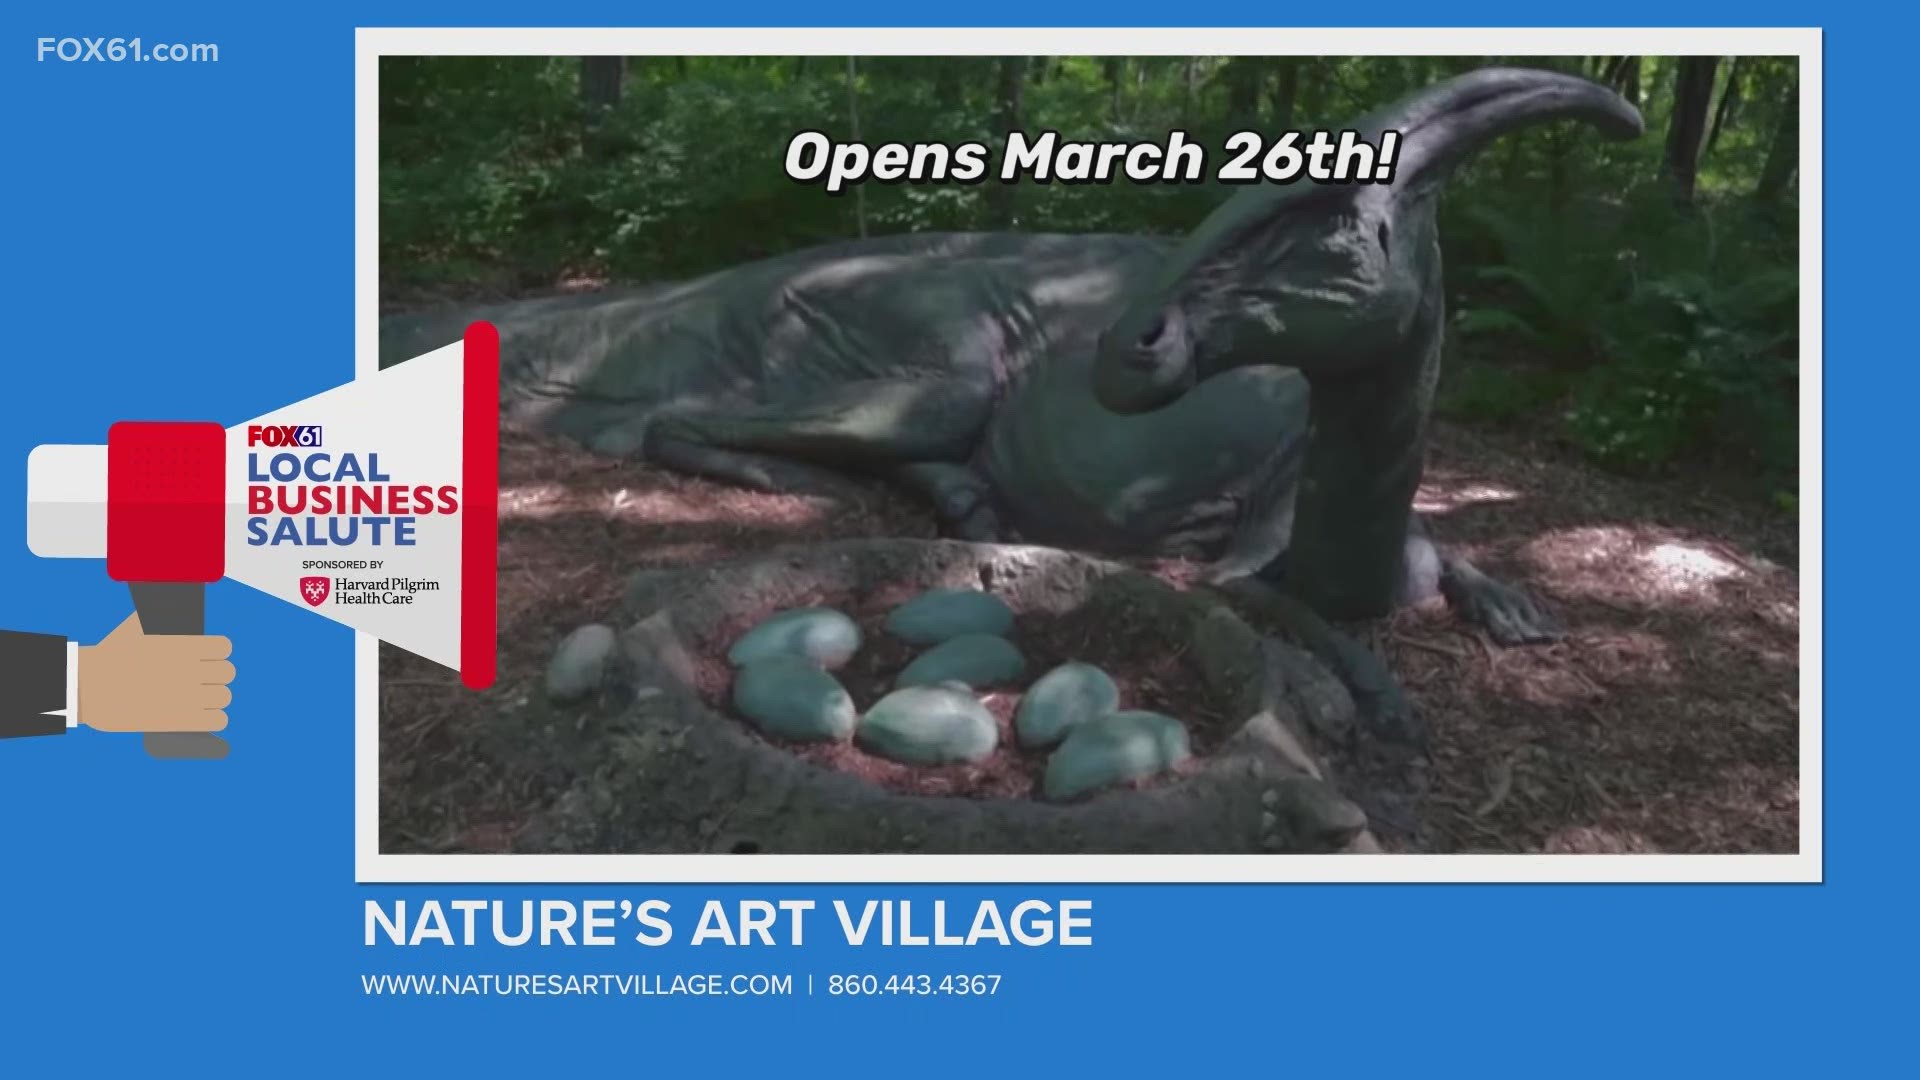 Nature's Art Village in Oakdale is open! You can see the Dinosaur Place without a reservation